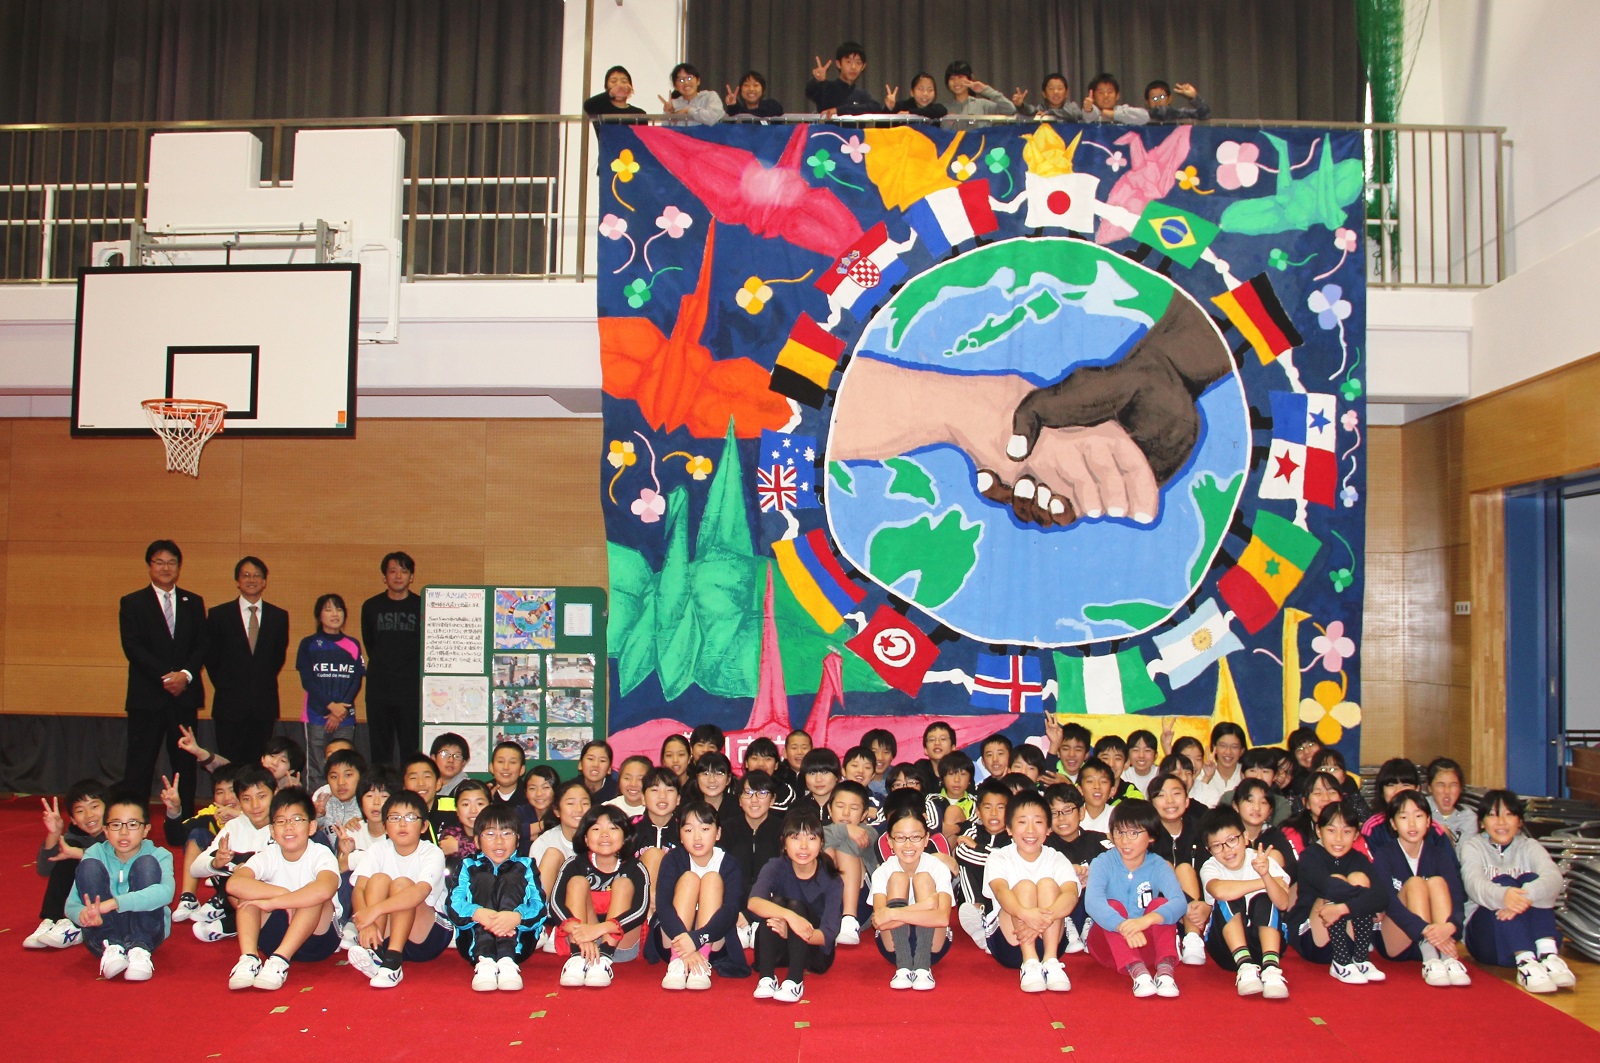 The Biggest Painting in the World 2020 Toyokawa city was completed